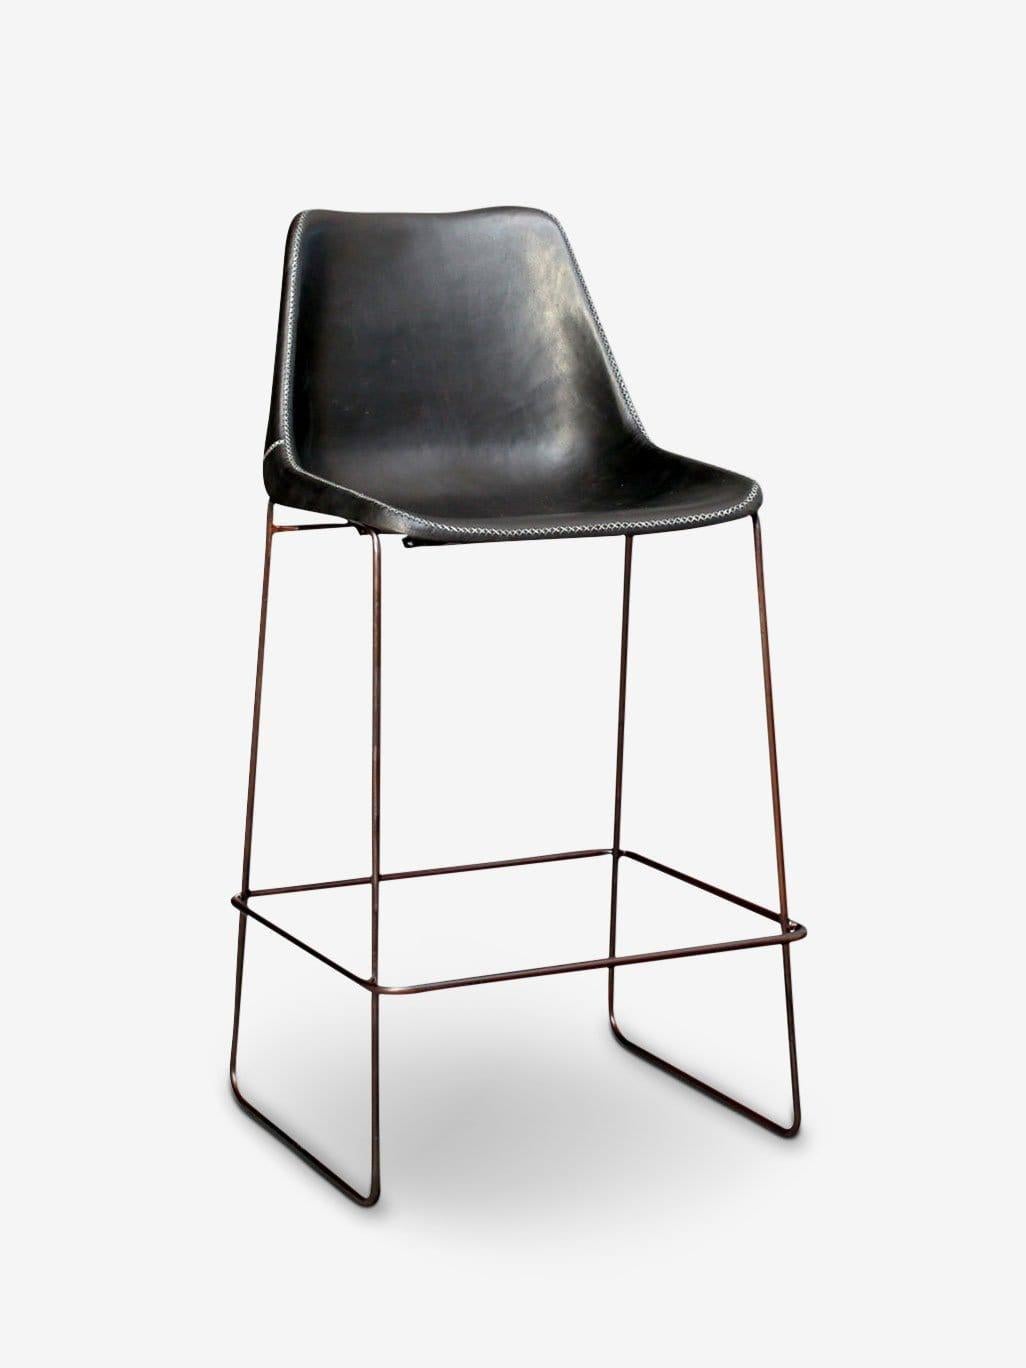 High Leather Giron Bar Stool by Sol Y Luna For Sale 1